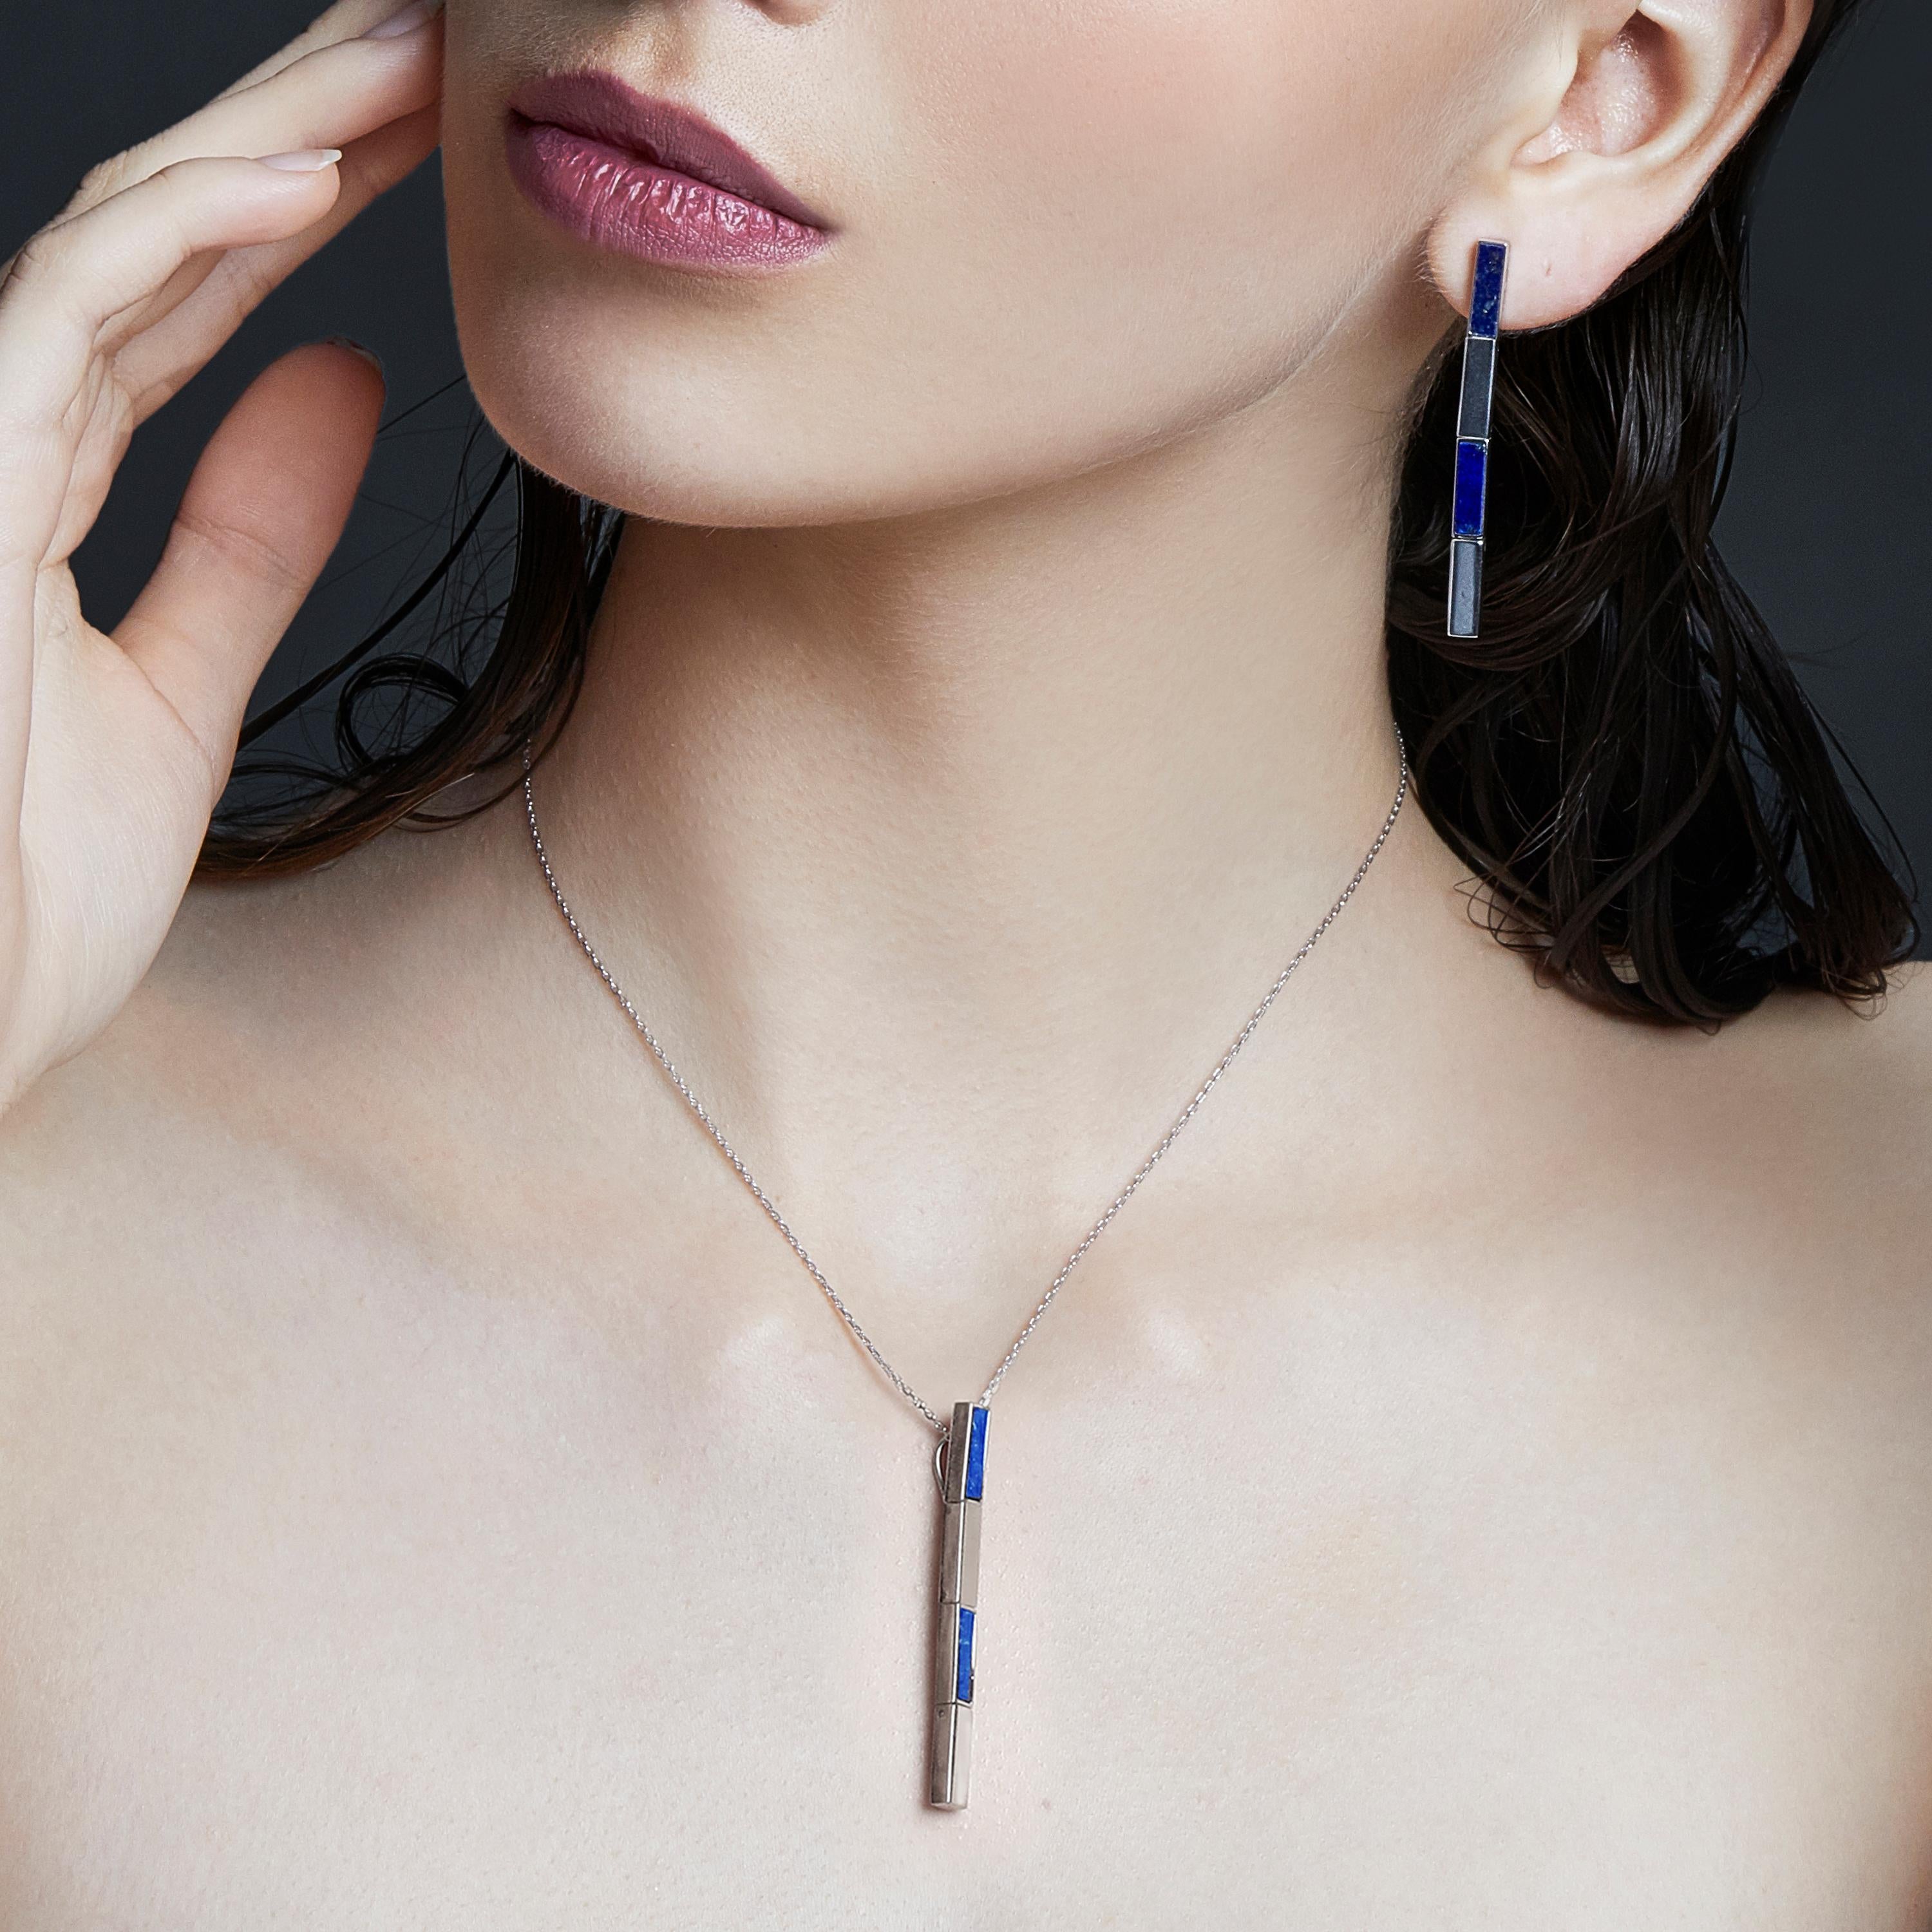 A lapis lazuli jewellery collection, which focuses on the celestial gemstone. The dreamy blue and gold flecks of the stone are reminiscent of the night sky. In spirituality, the lapis lazuli symbolises power, vision and spirit. Midnight Blue pendant